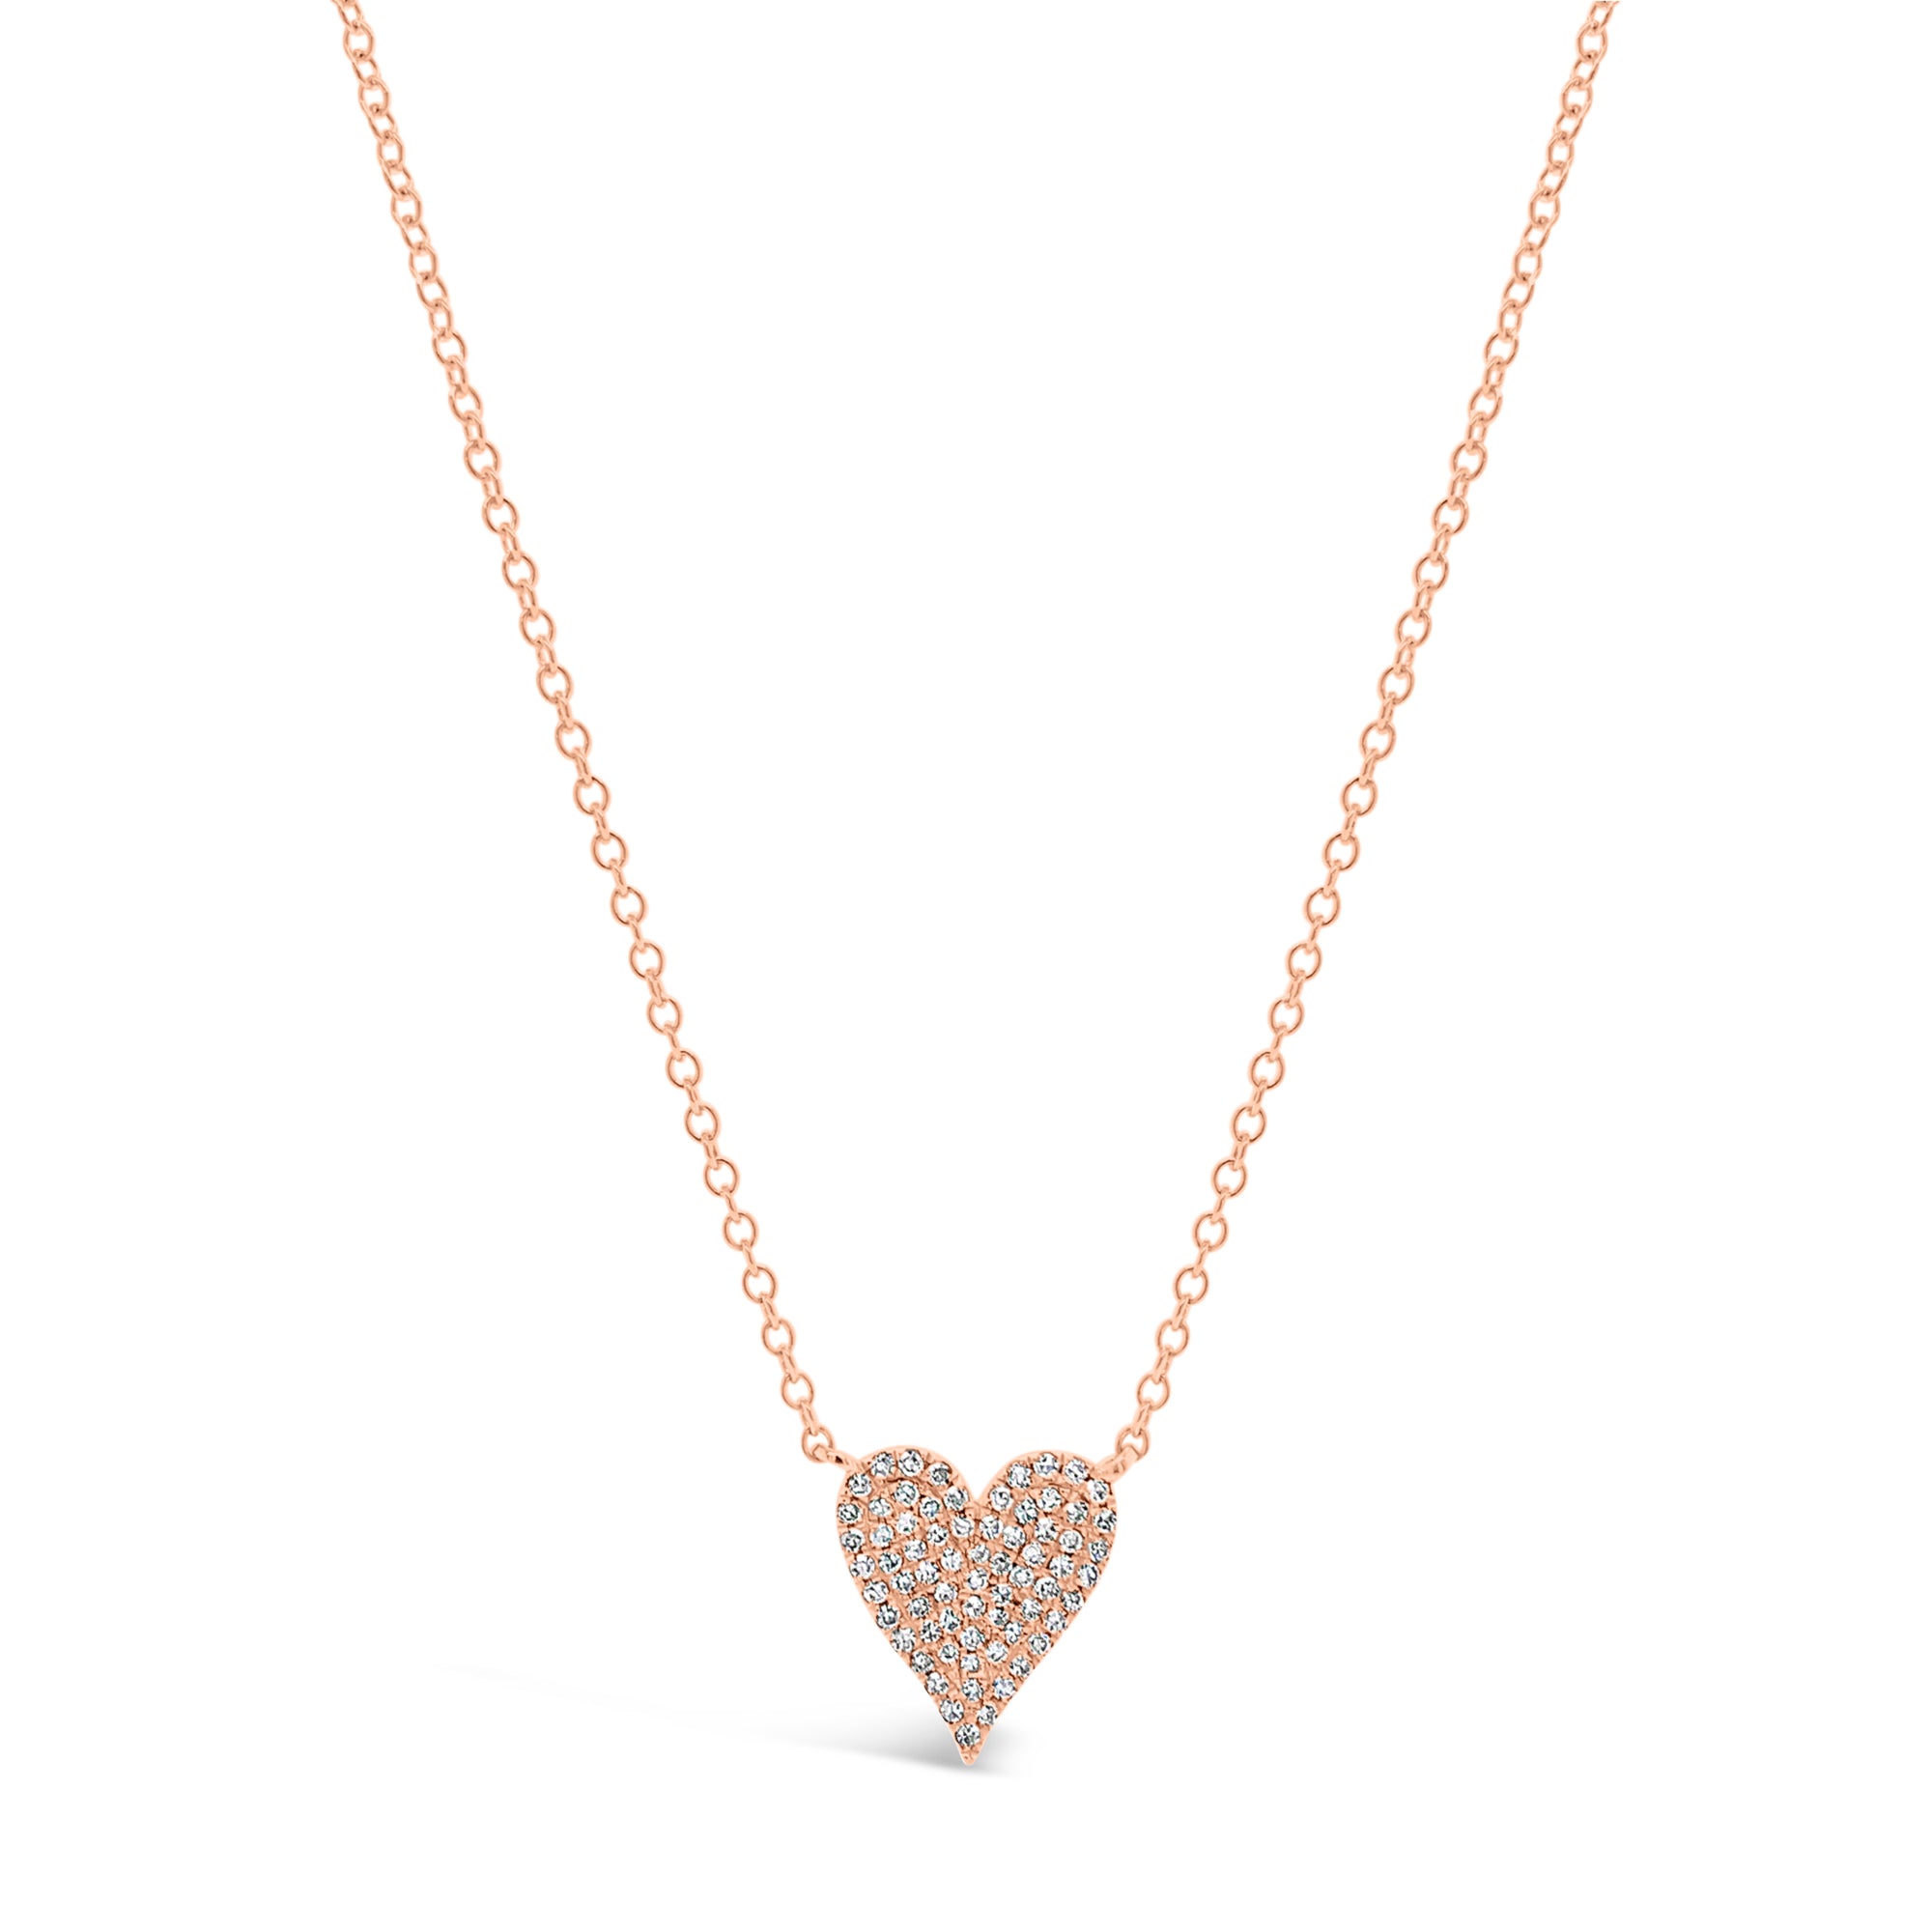 Diamond Heart Pendant Necklace  - 14K gold weighing 1.80 grams.  - 69 round diamonds totaling 0.16 carats.